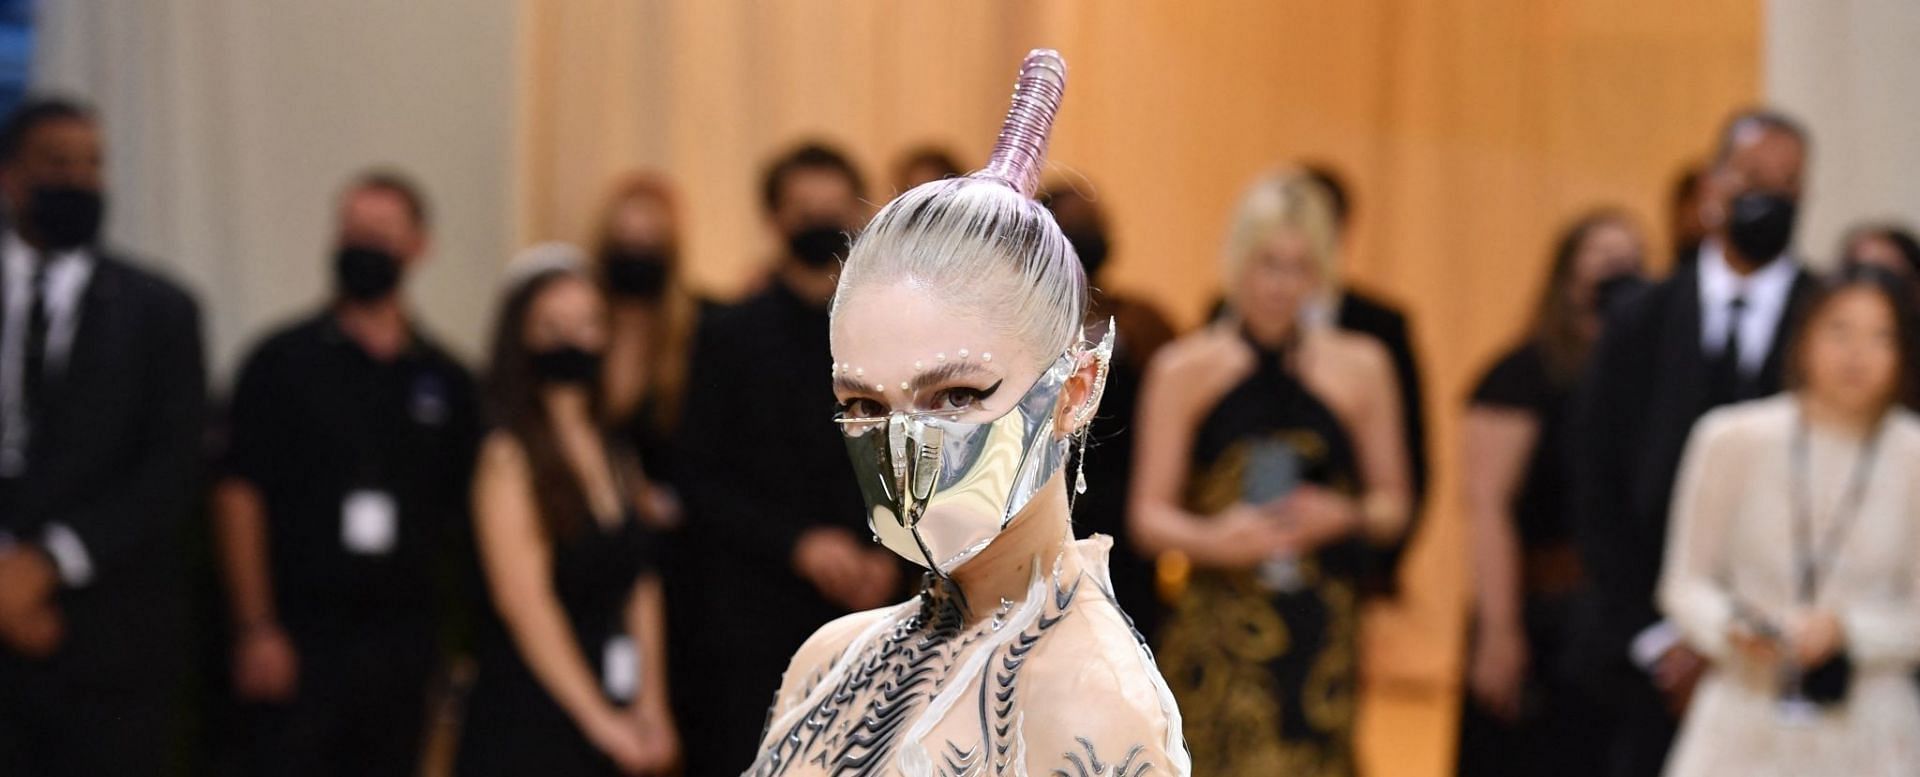 Grimes sparked pregnancy rumors with a new Instagram photo (Image via Angela Weiss/Getty Images)